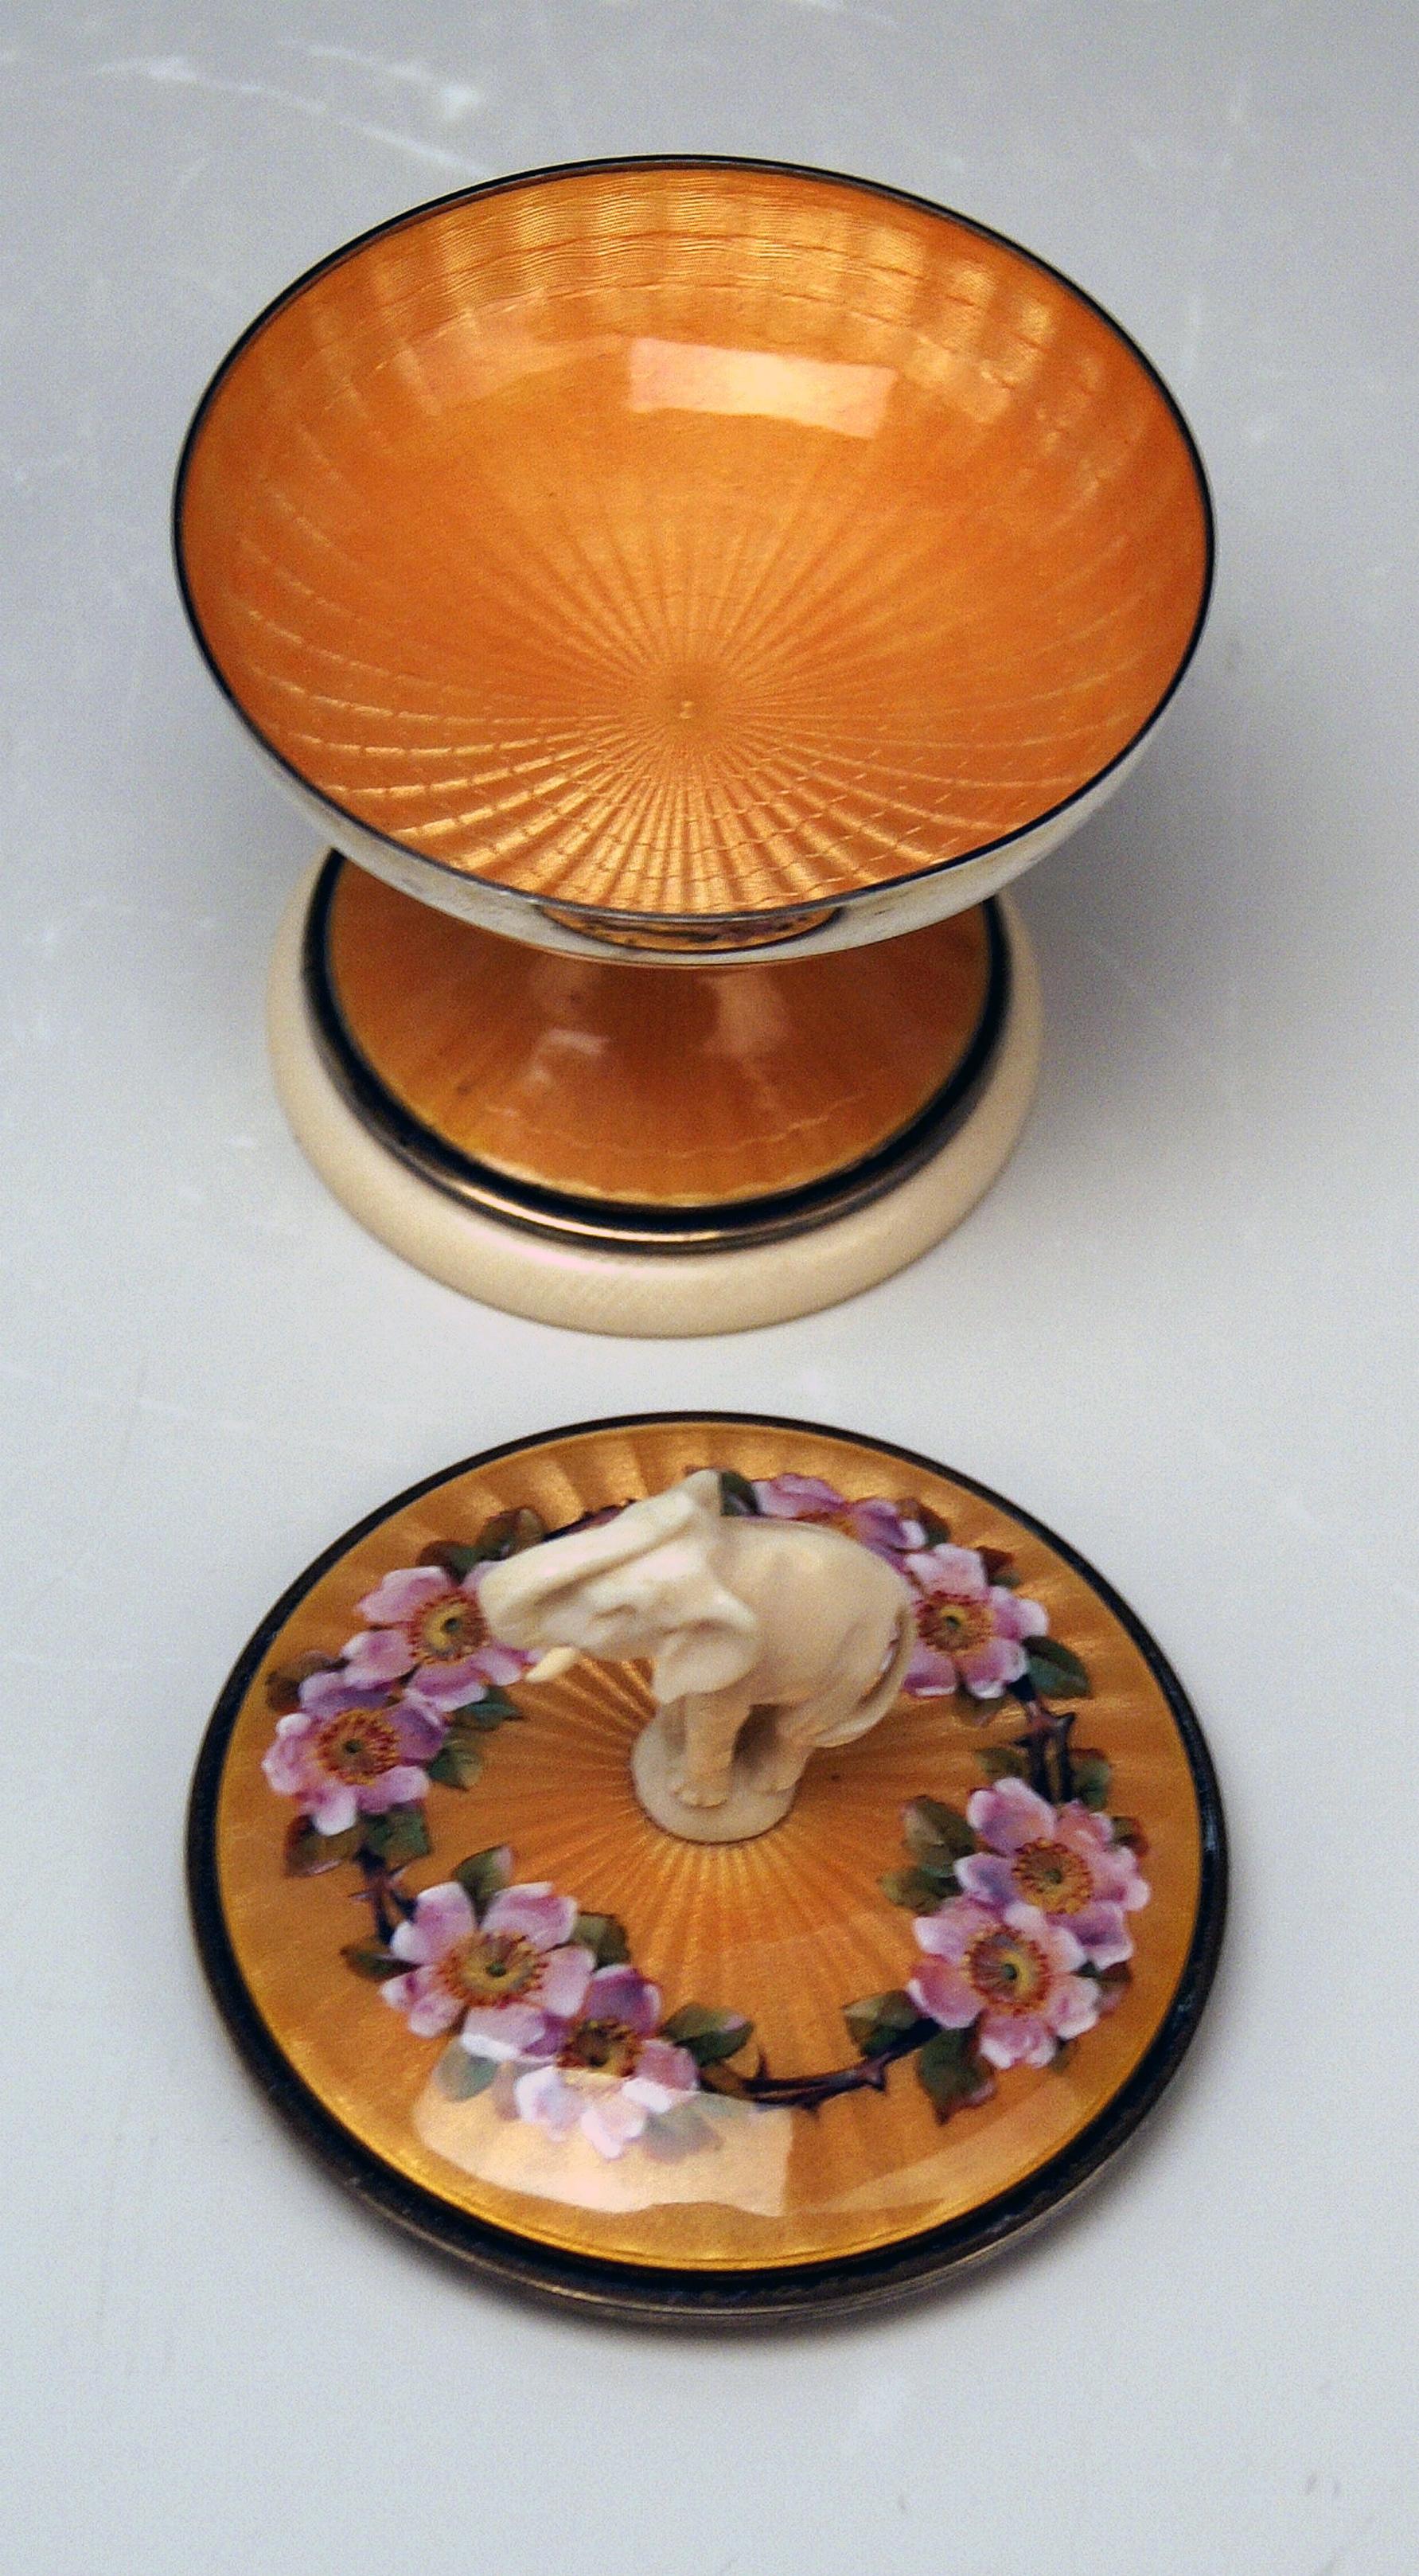 STUNNING SMALL UK SILVER GOBLET ENAMELLED WITH ELEPHANT'S FIGURINE TOPPING LID .

It is a rarest small silver lidded goblet which is stunningly enamelled: 
Color of enamel is shimmering in golden-orange shades / the goblet's lid to which inner